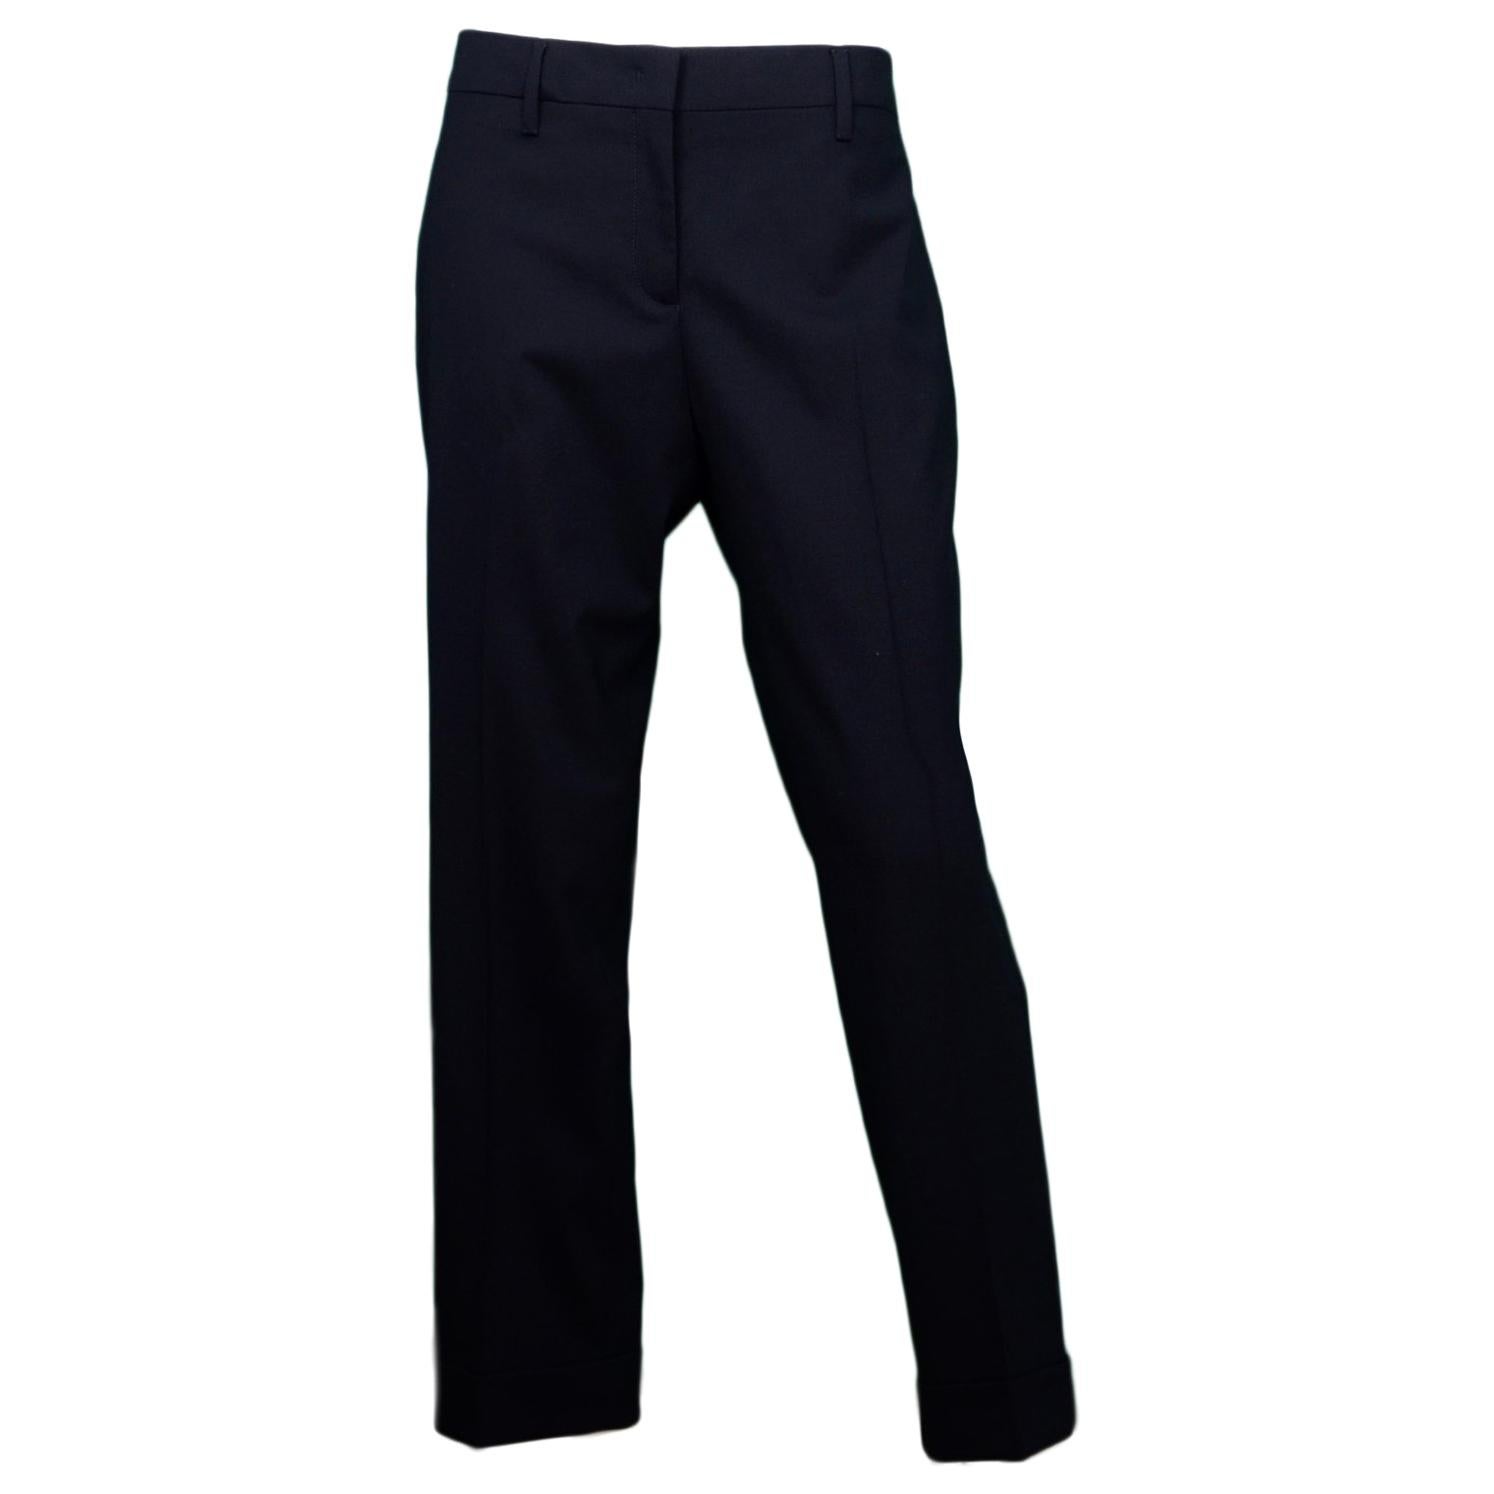 Vittorino Boys Tailored Fit Flat Front Dress Pants with Detachable Belt